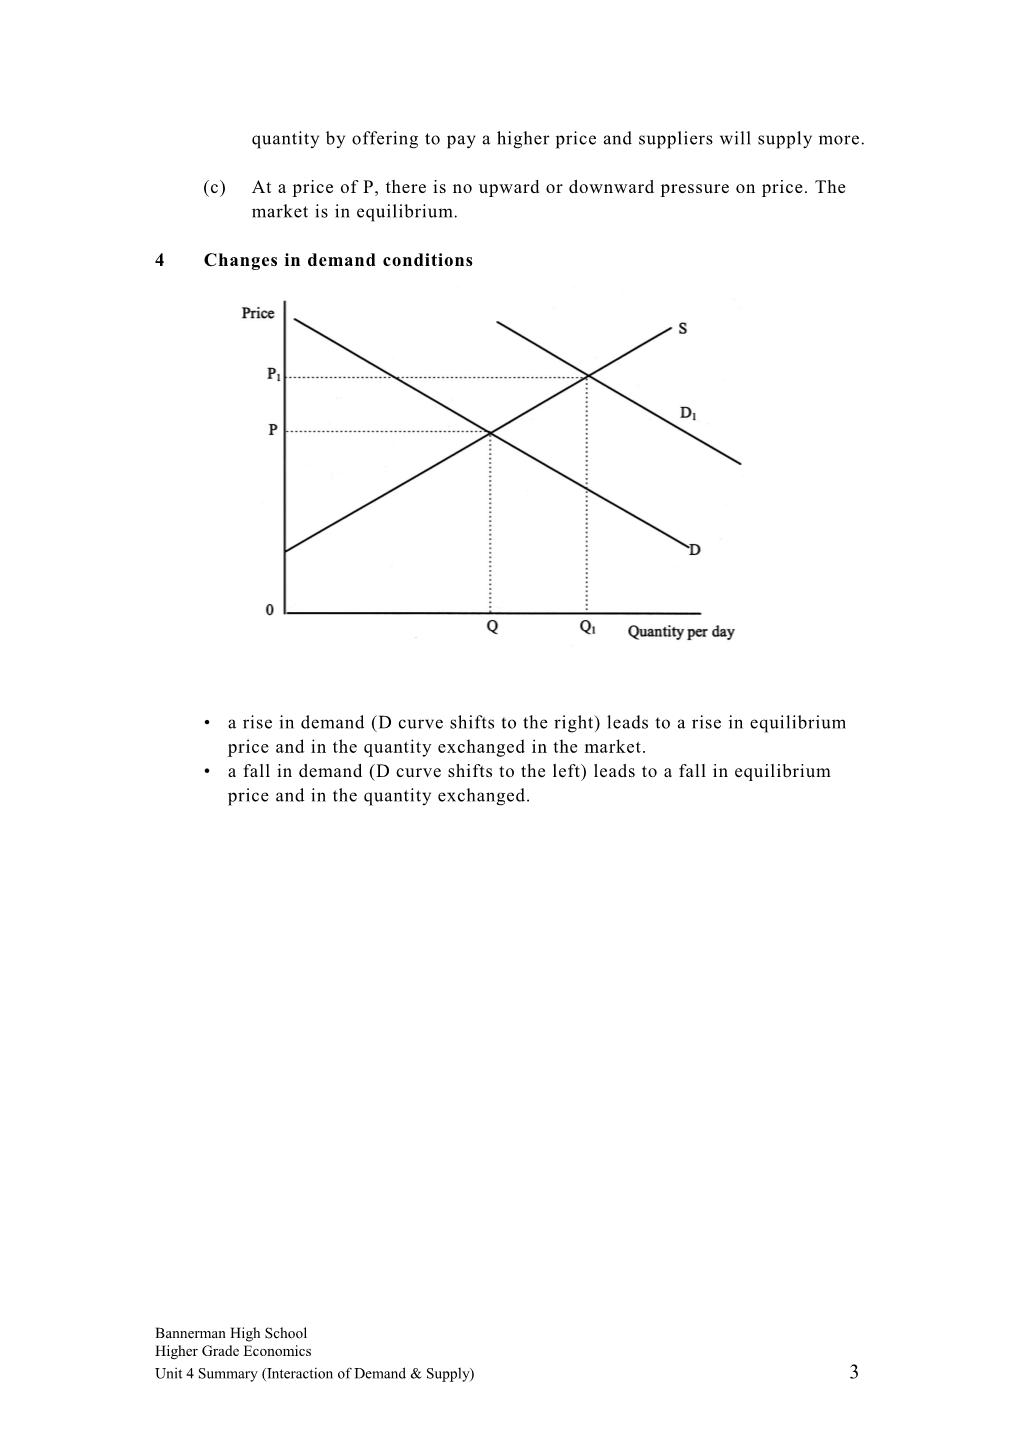 Topic 4: Interaction of Demand and Supply